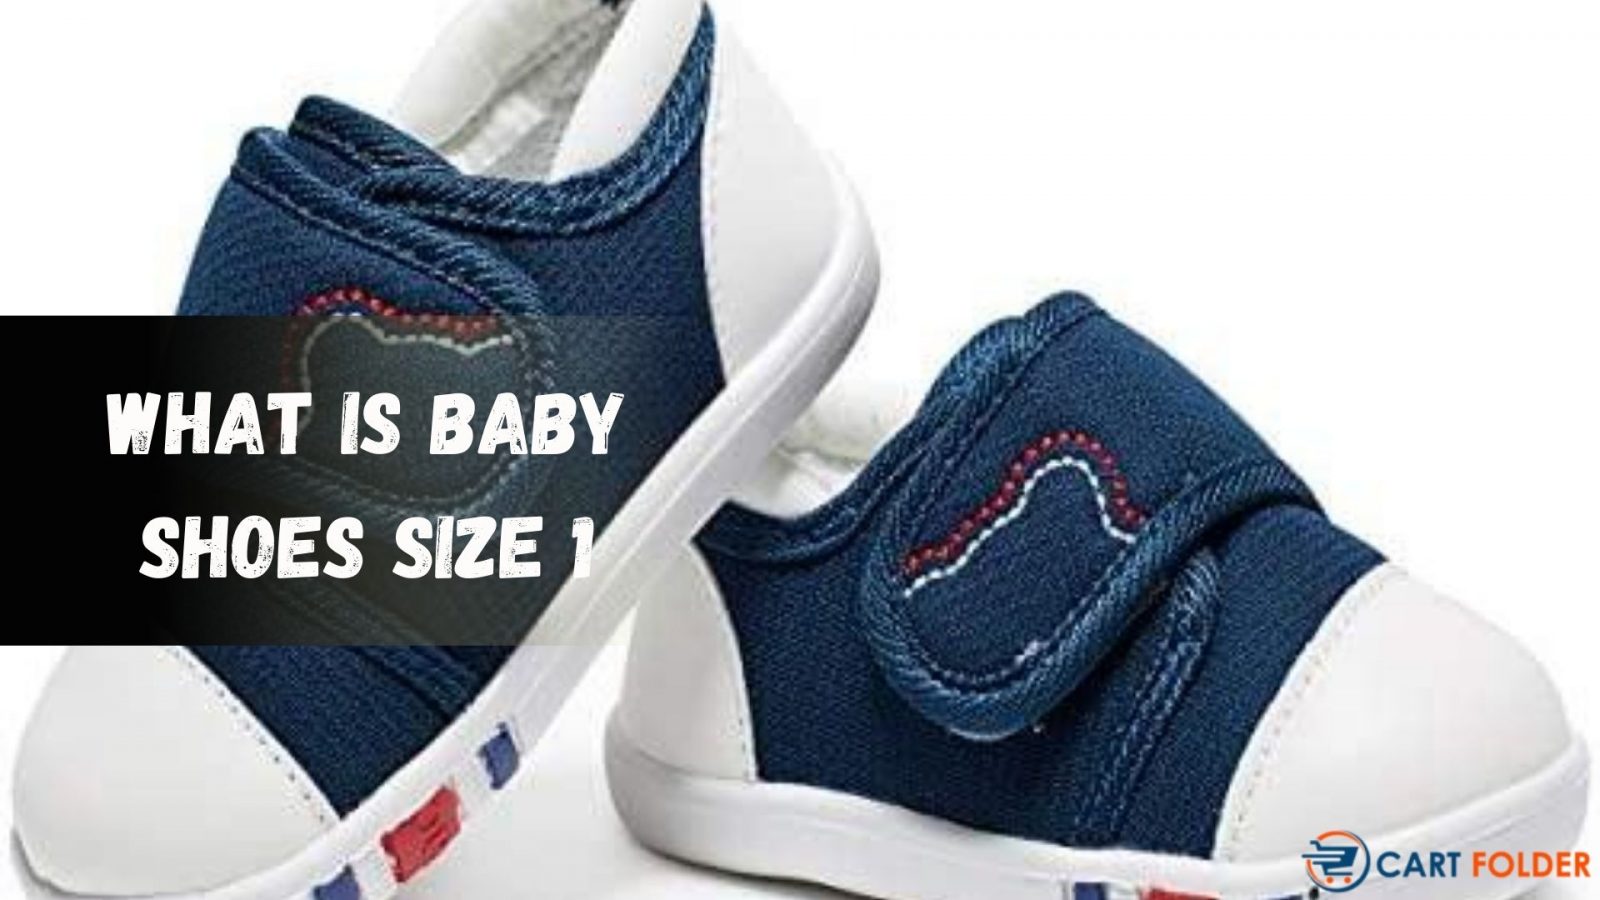 size 1 baby shoes